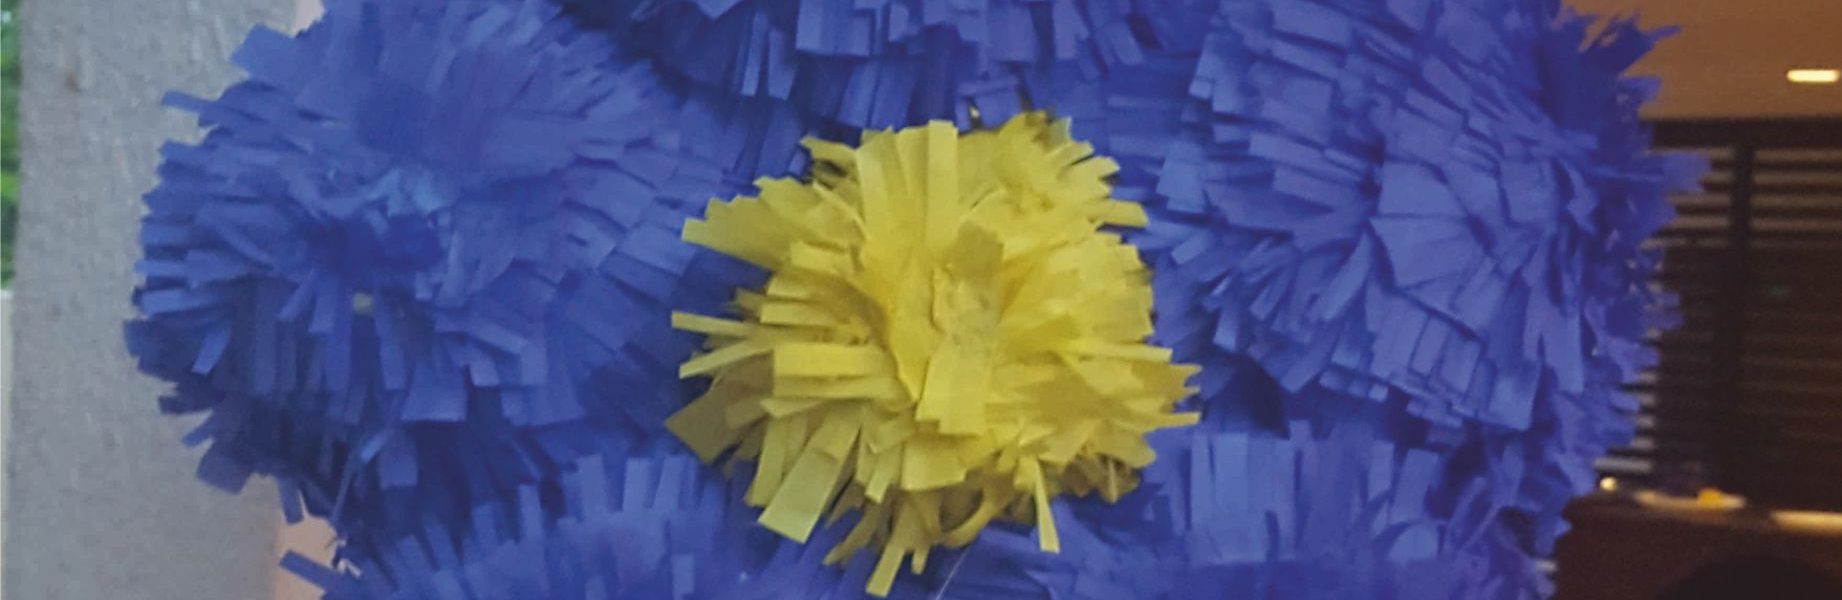 How to make a flower shaped pinata